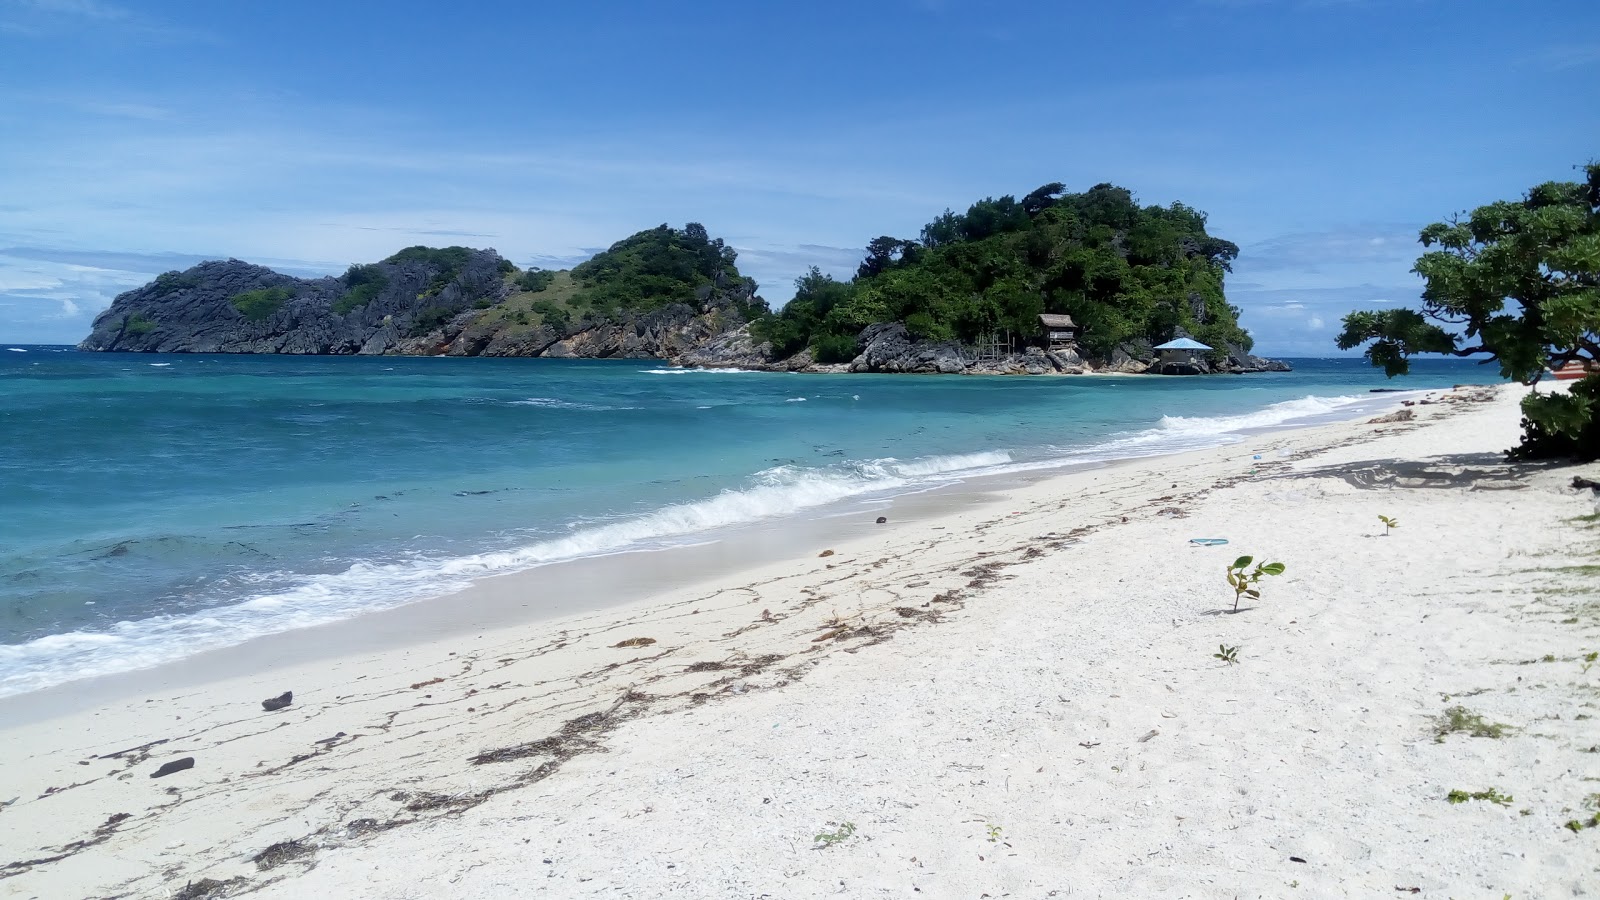 Photo of Buyayao Island Resort - popular place among relax connoisseurs